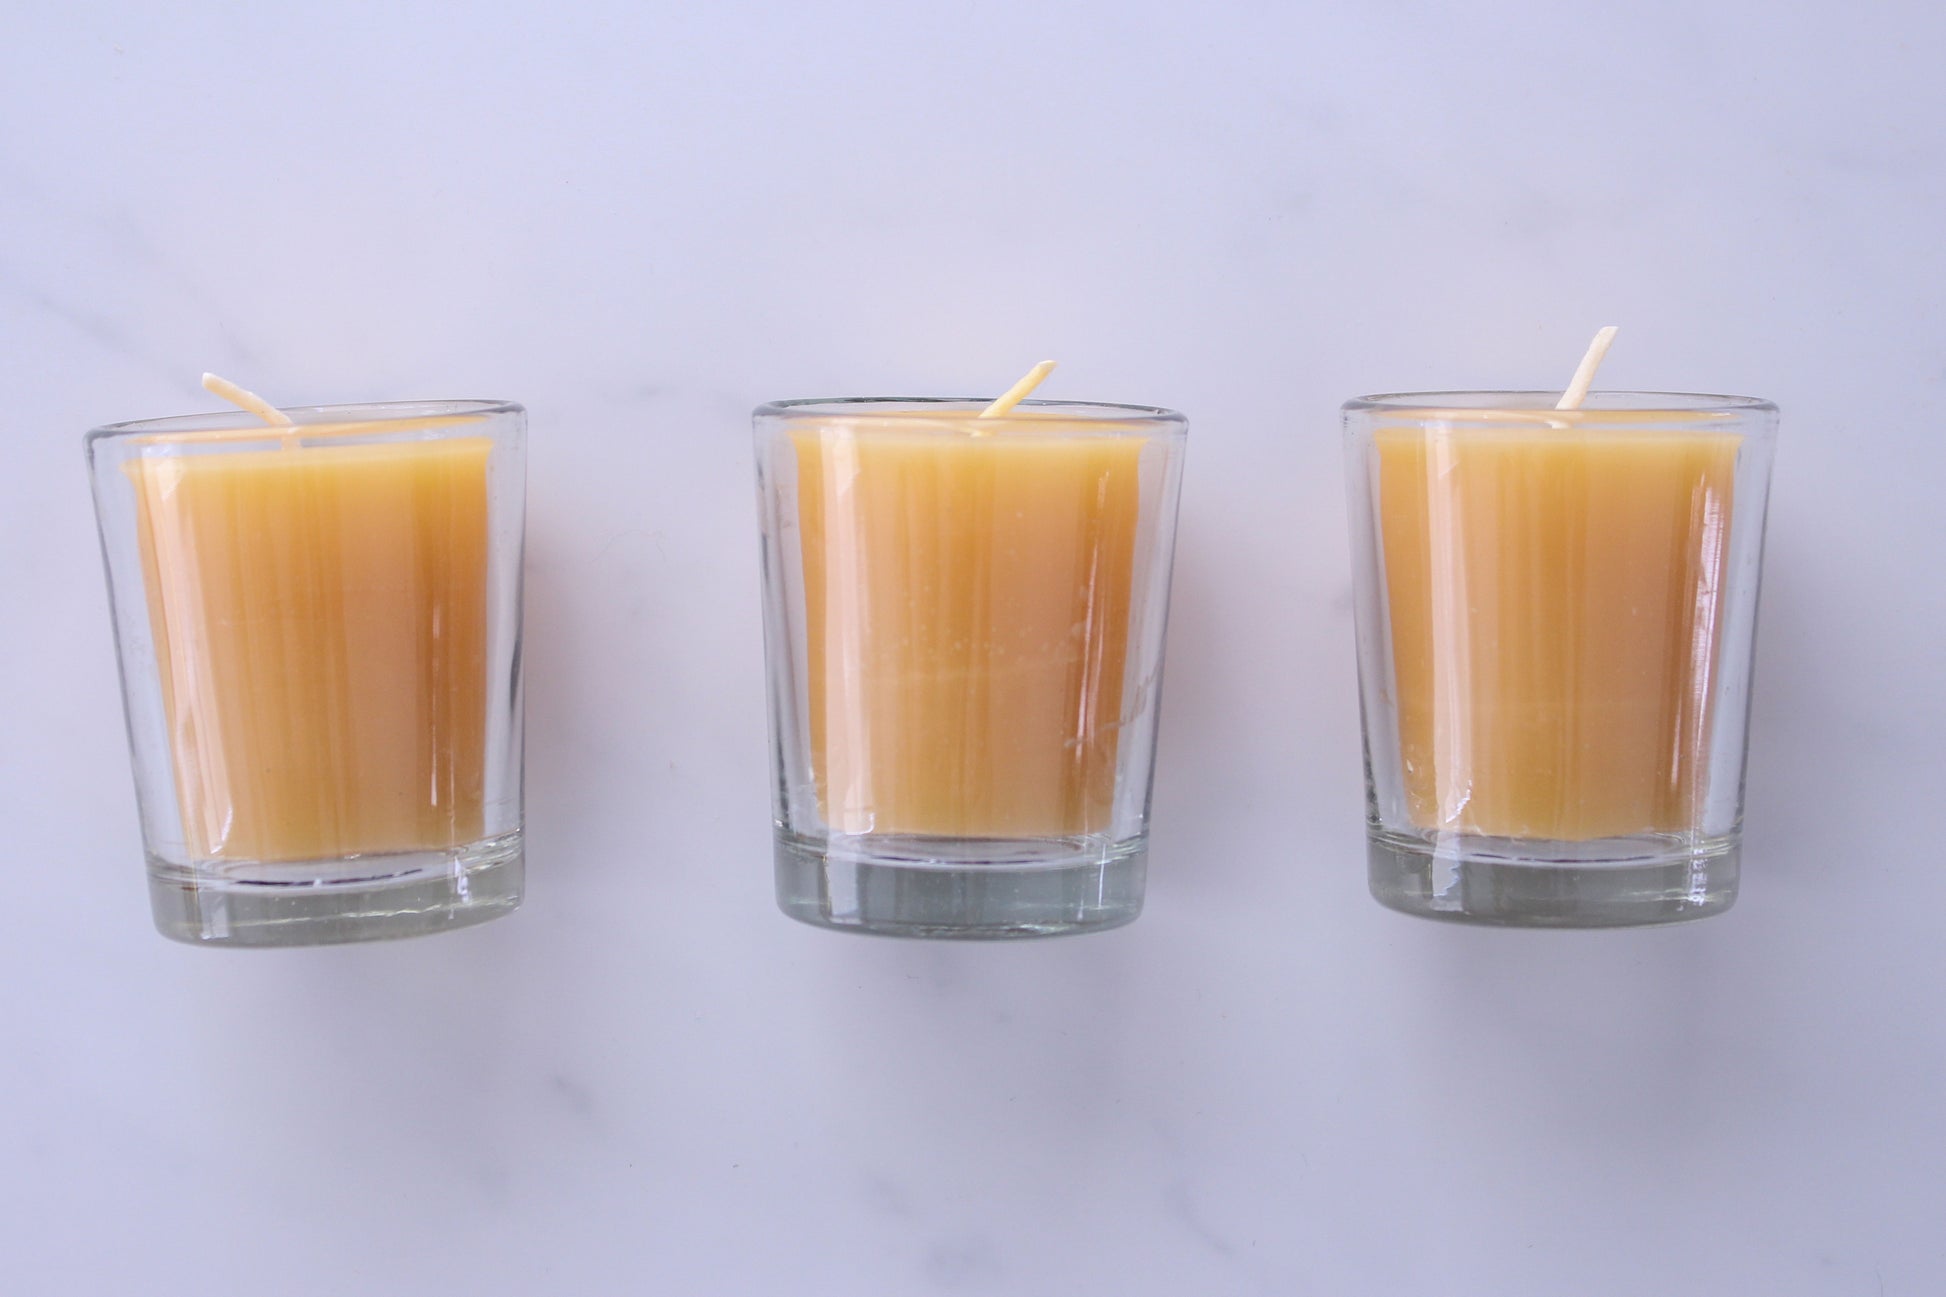 3 beeswax votive candles in glass votive holders